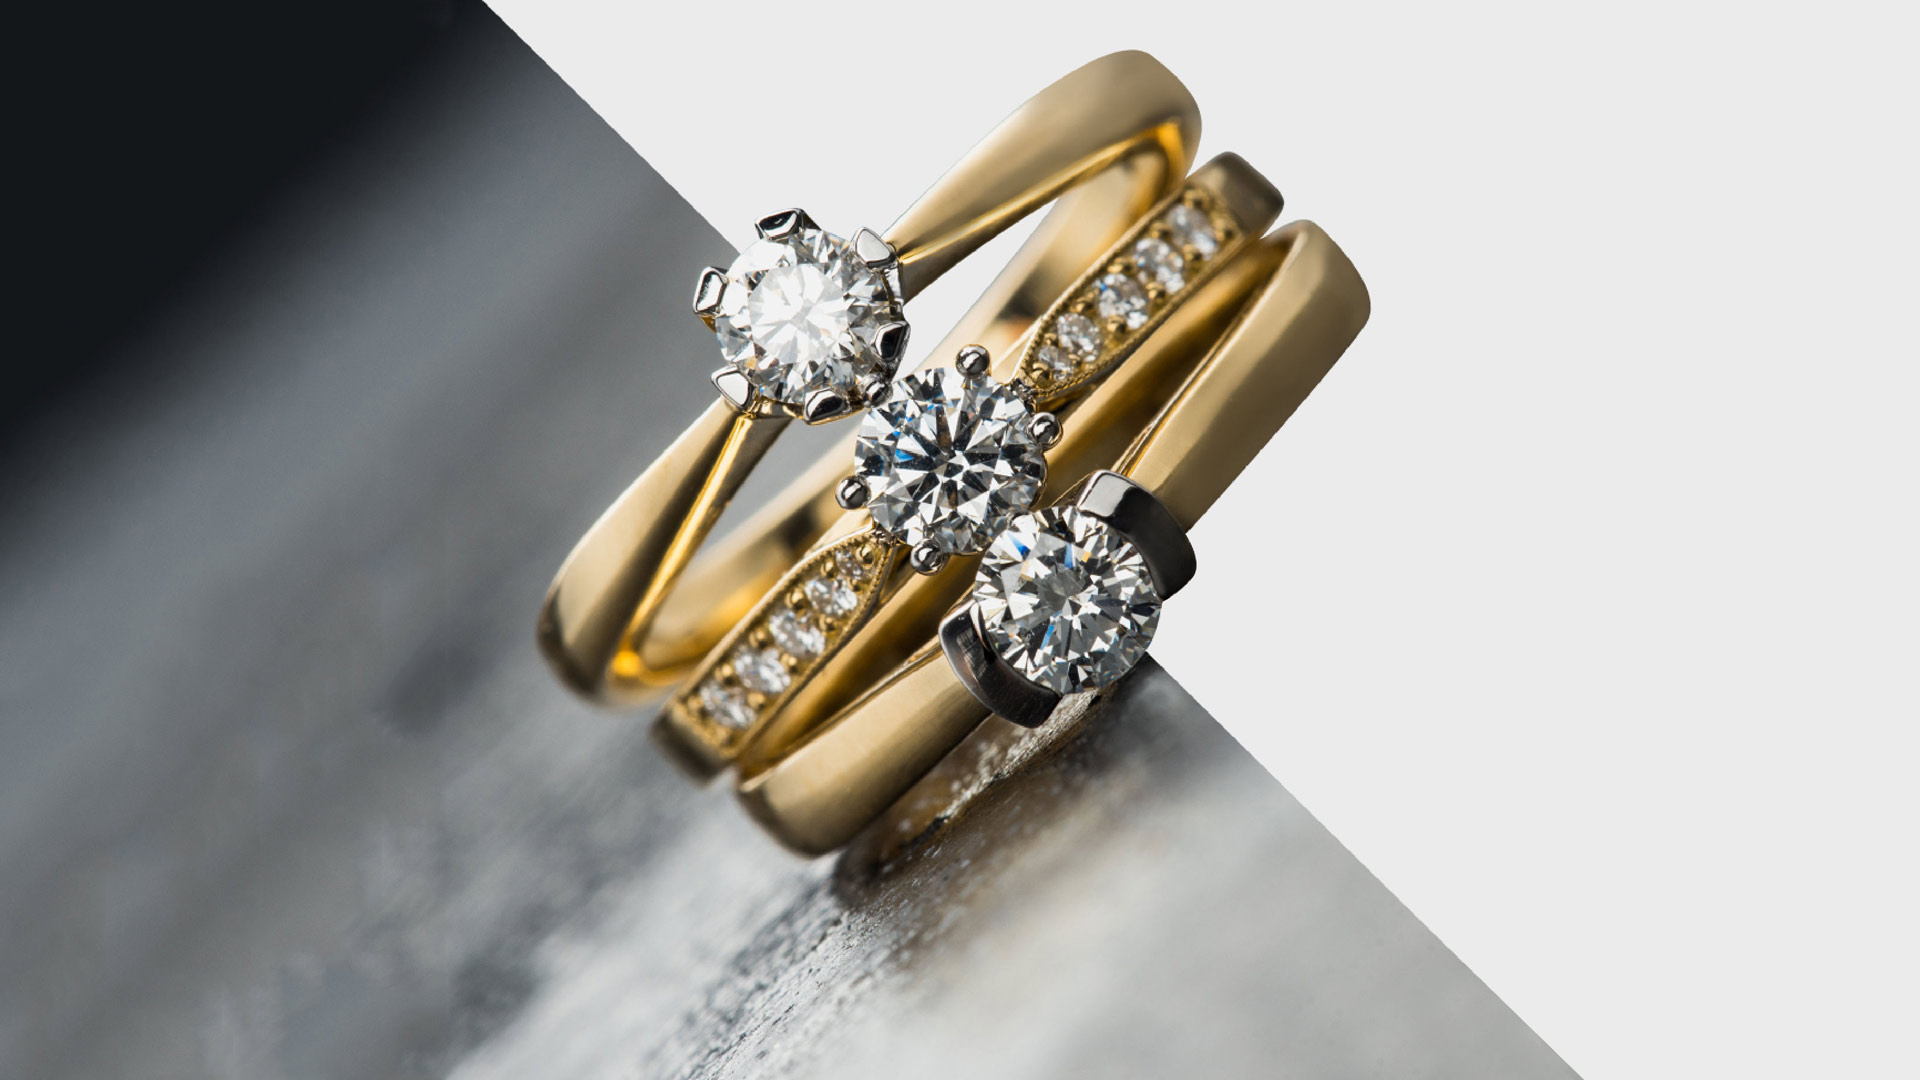 Jewelry product photos, Perfectly edited, Dropicts expertise, Stunning visuals, 1920x1080 Full HD Desktop